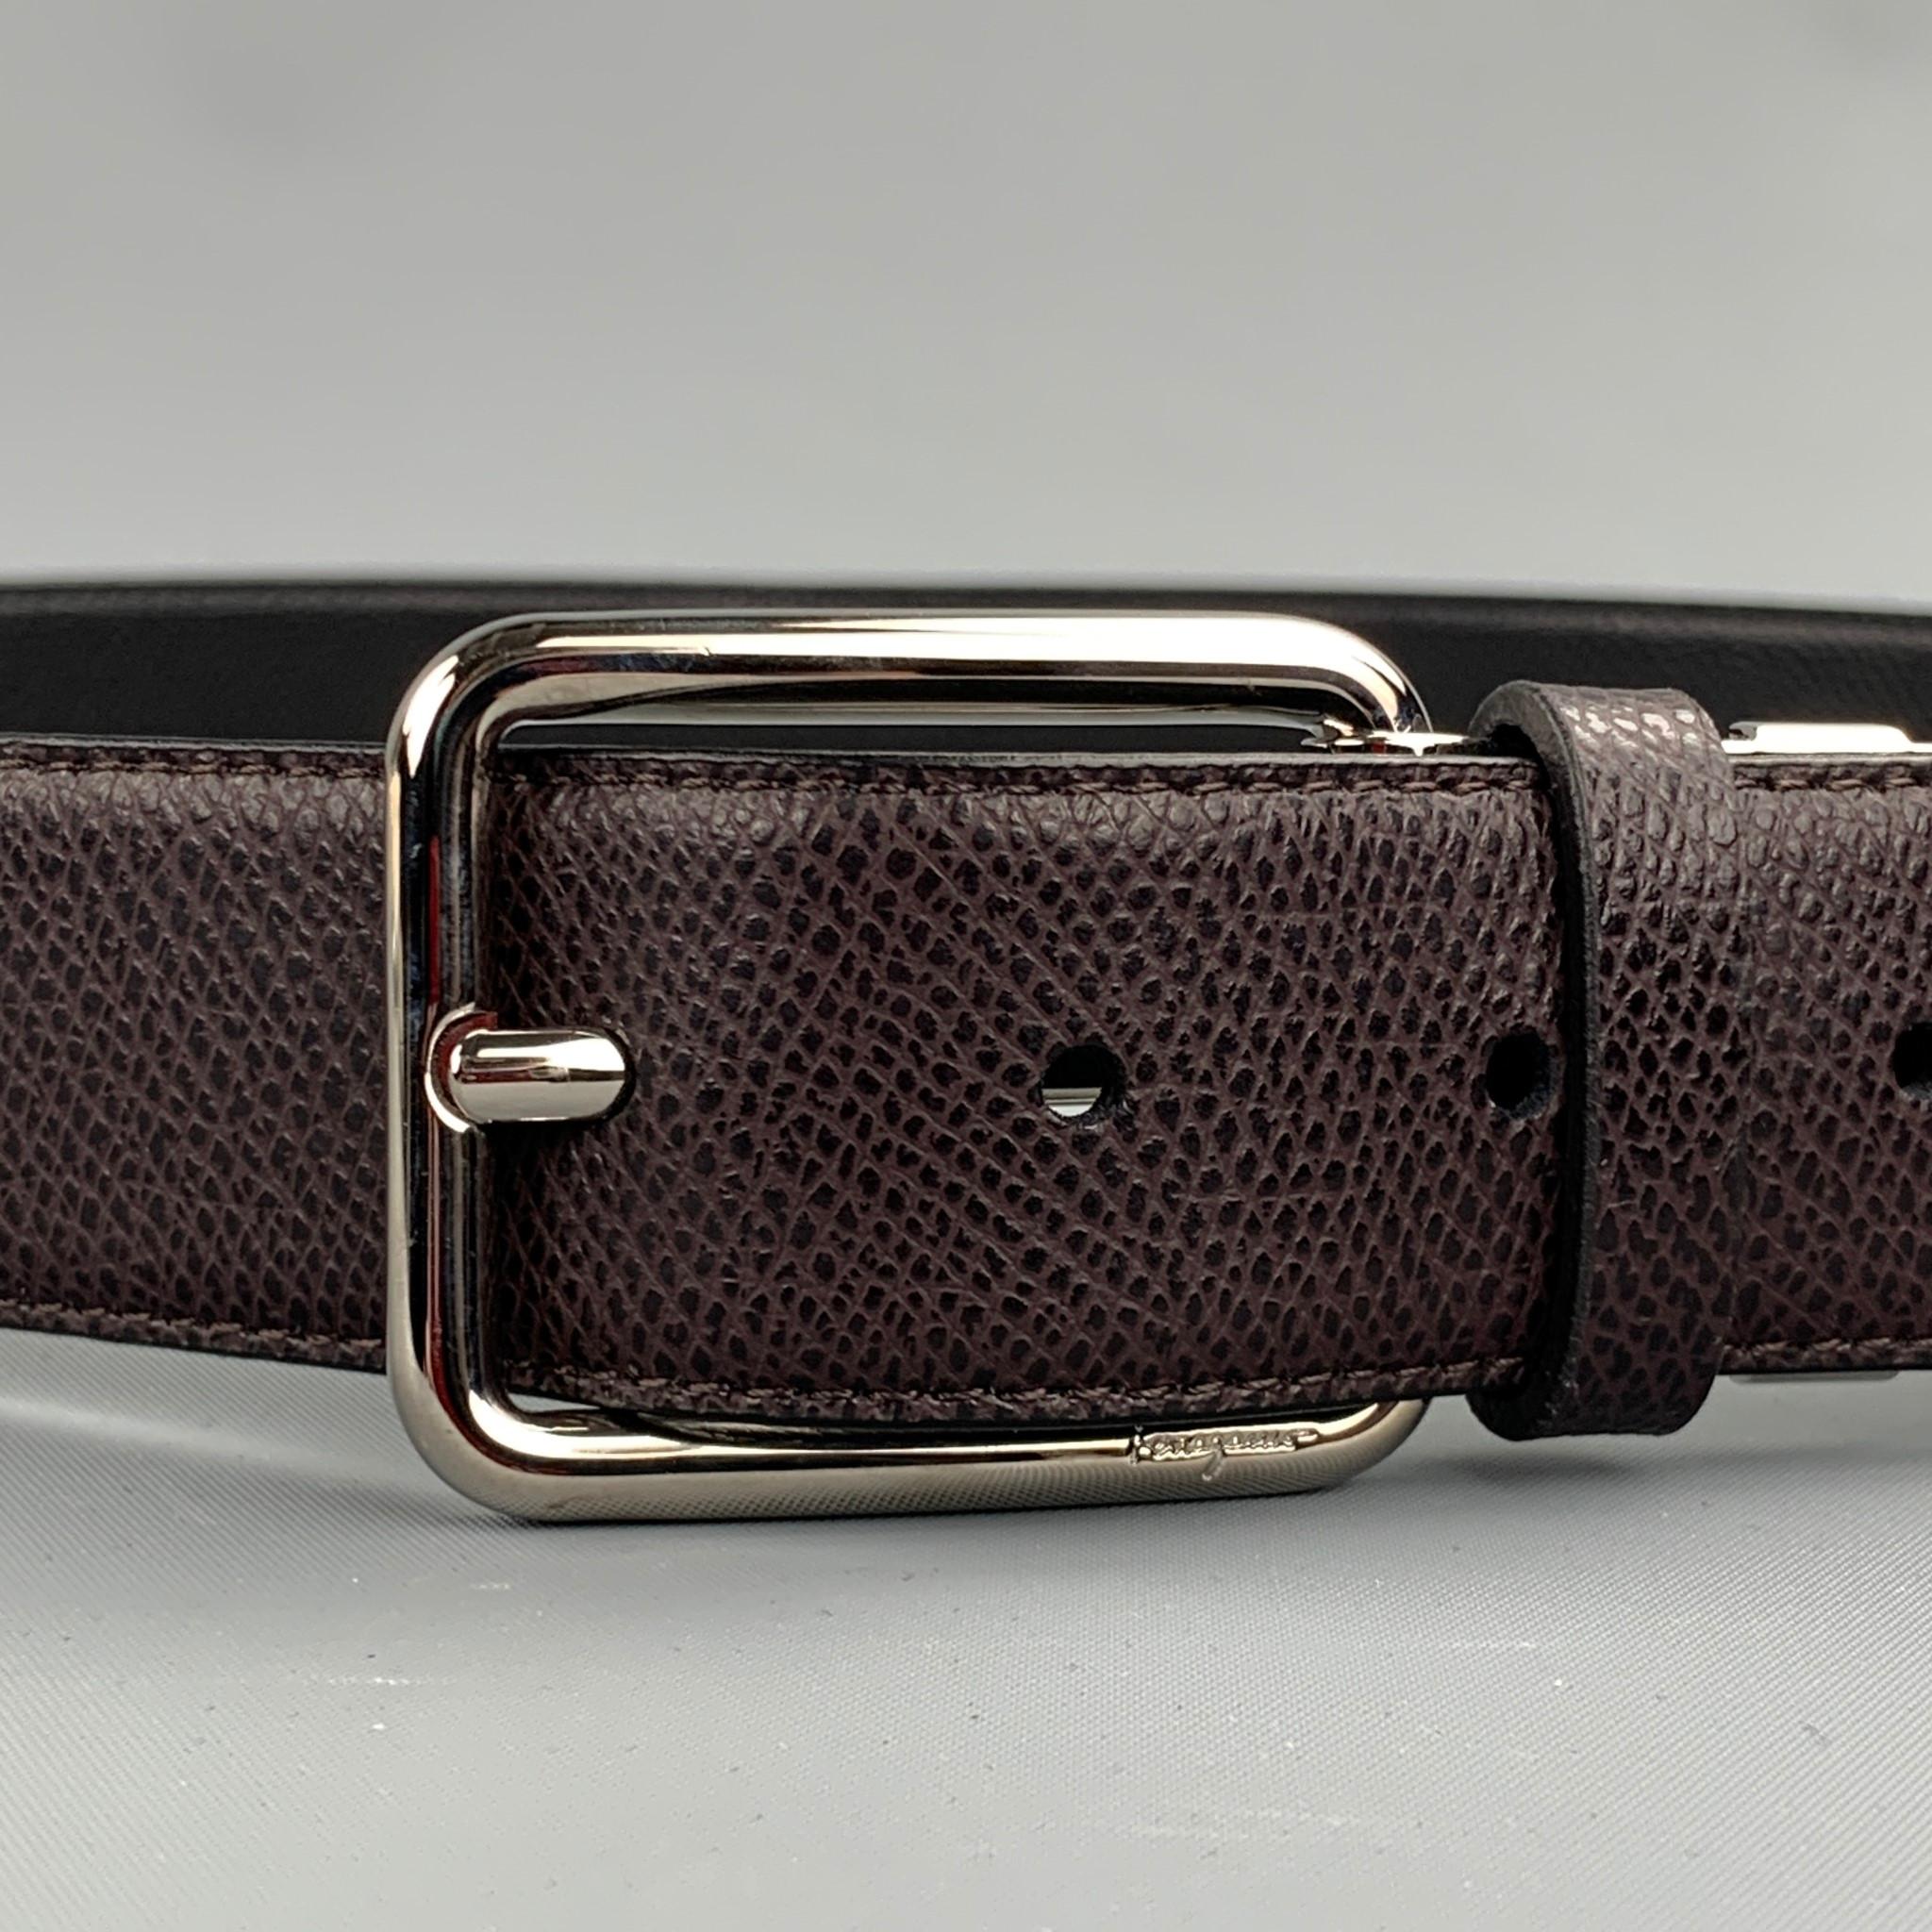 SALVATORE FERRAGAMO belt comes in a brown leather featuring a silver tone buckle closure. Made in Italy.

Excellent Pre-Owned Condition.
Marked: No size marked

Length: 45 in. 
Width: 1.5 in. 
Fits: 37 in. - 41 in. 
Buckle: 2 in. 